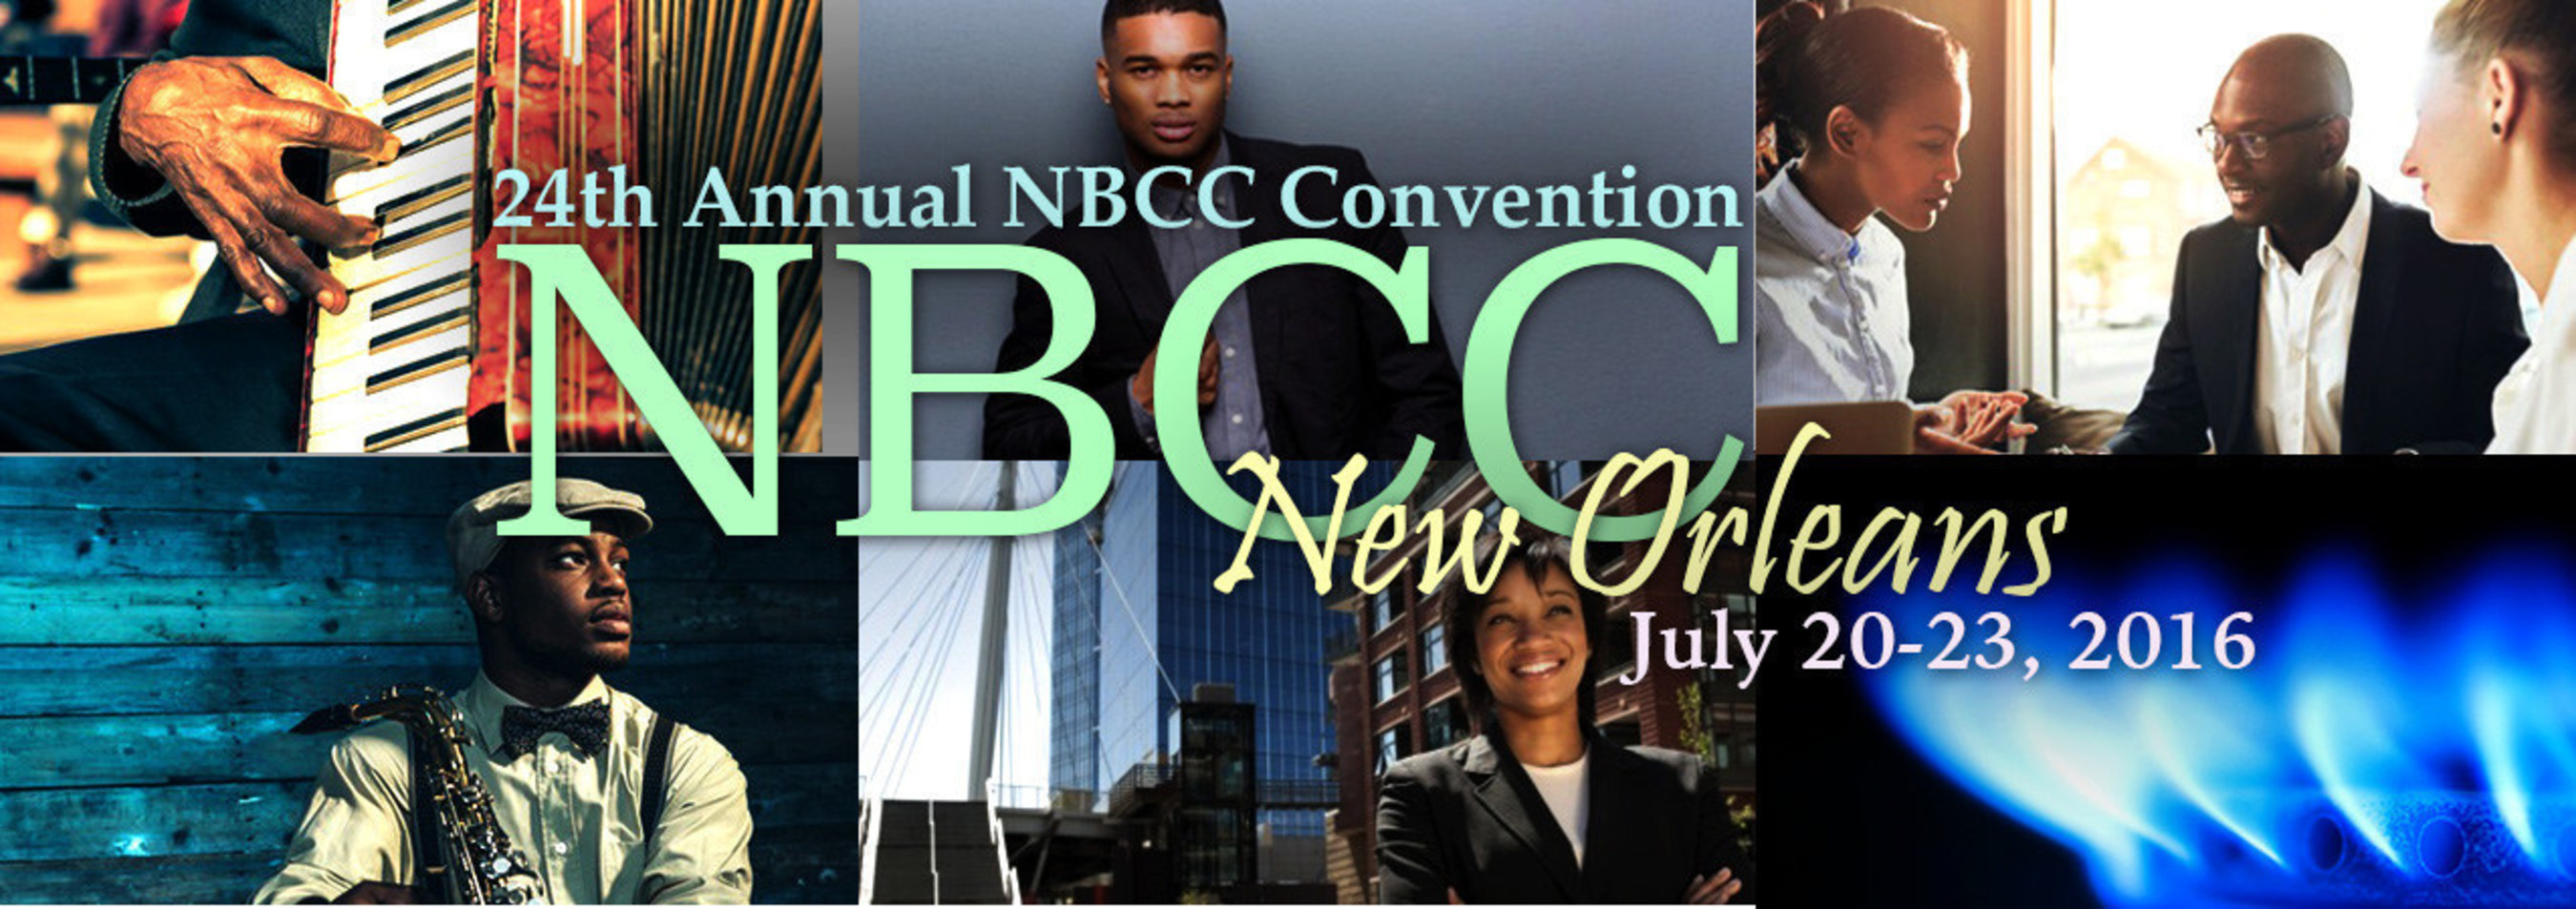 One of the nation's preeminent business advocacy organization, the National Black Chamber of Commerce announces its 24th Annual Entrepreneurial Convention, set for July 20-23, 2016, in New Orleans, Louisiana. Focused on Empowering Business Leaders for Maximum Success.  "By being a trailblazer in the proliferation of business policy, innovation, technology, black business development and critical convening, we are delighted to engage influential business and world leaders who have chosen to make our Conference a must attend event every summer, in July," said Harry C. Alford, president/CEO, NBCC.  Go to NBCCTODAY2016.org to register or find more information.